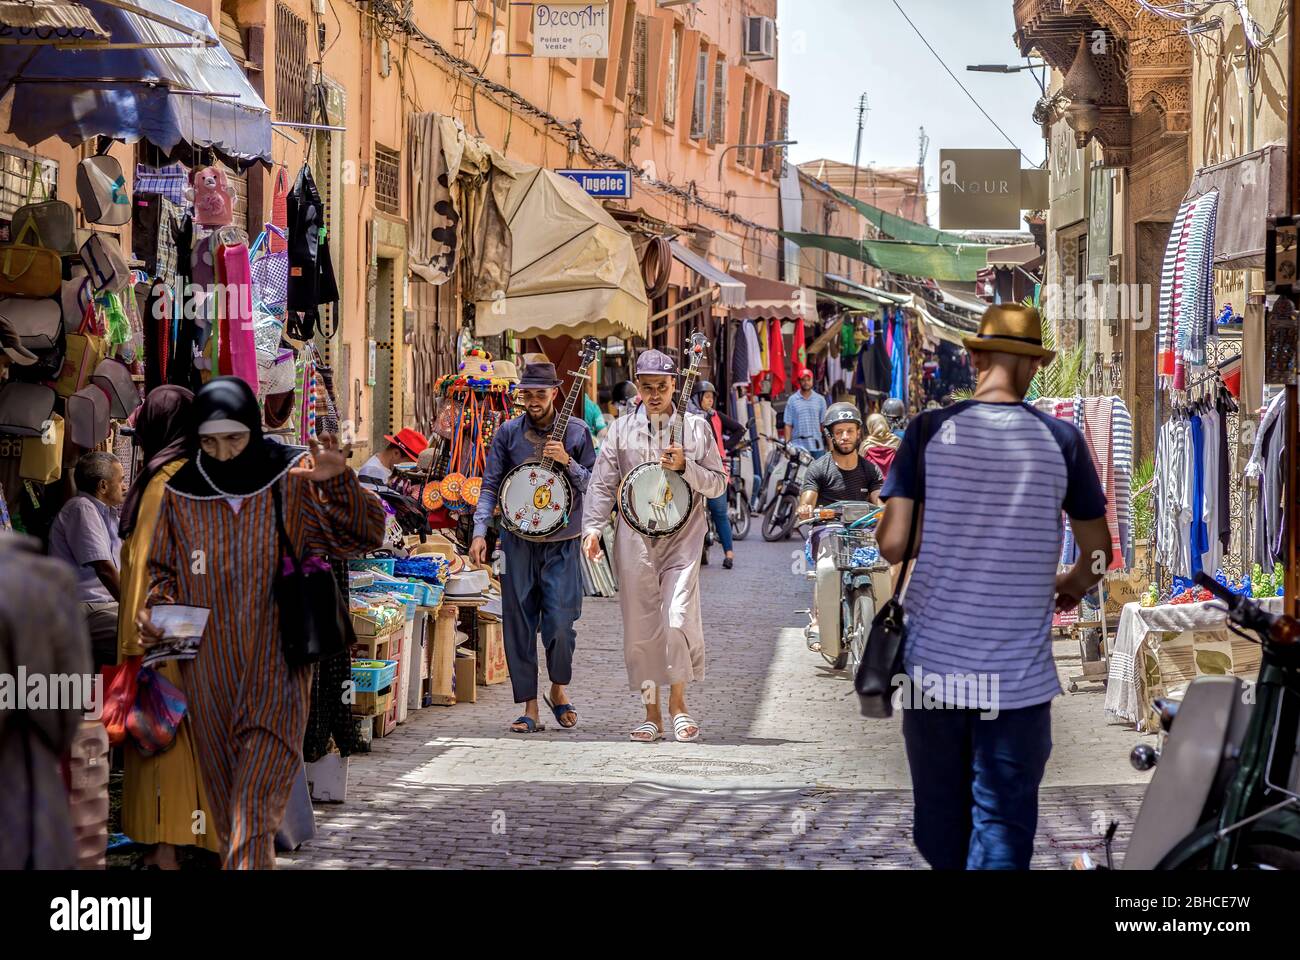 Typical street view of Marrakesh Medina Bazaar in Morocco. Crowded with hanging goods. Street musicians walk in the middle of the street Stock Photo